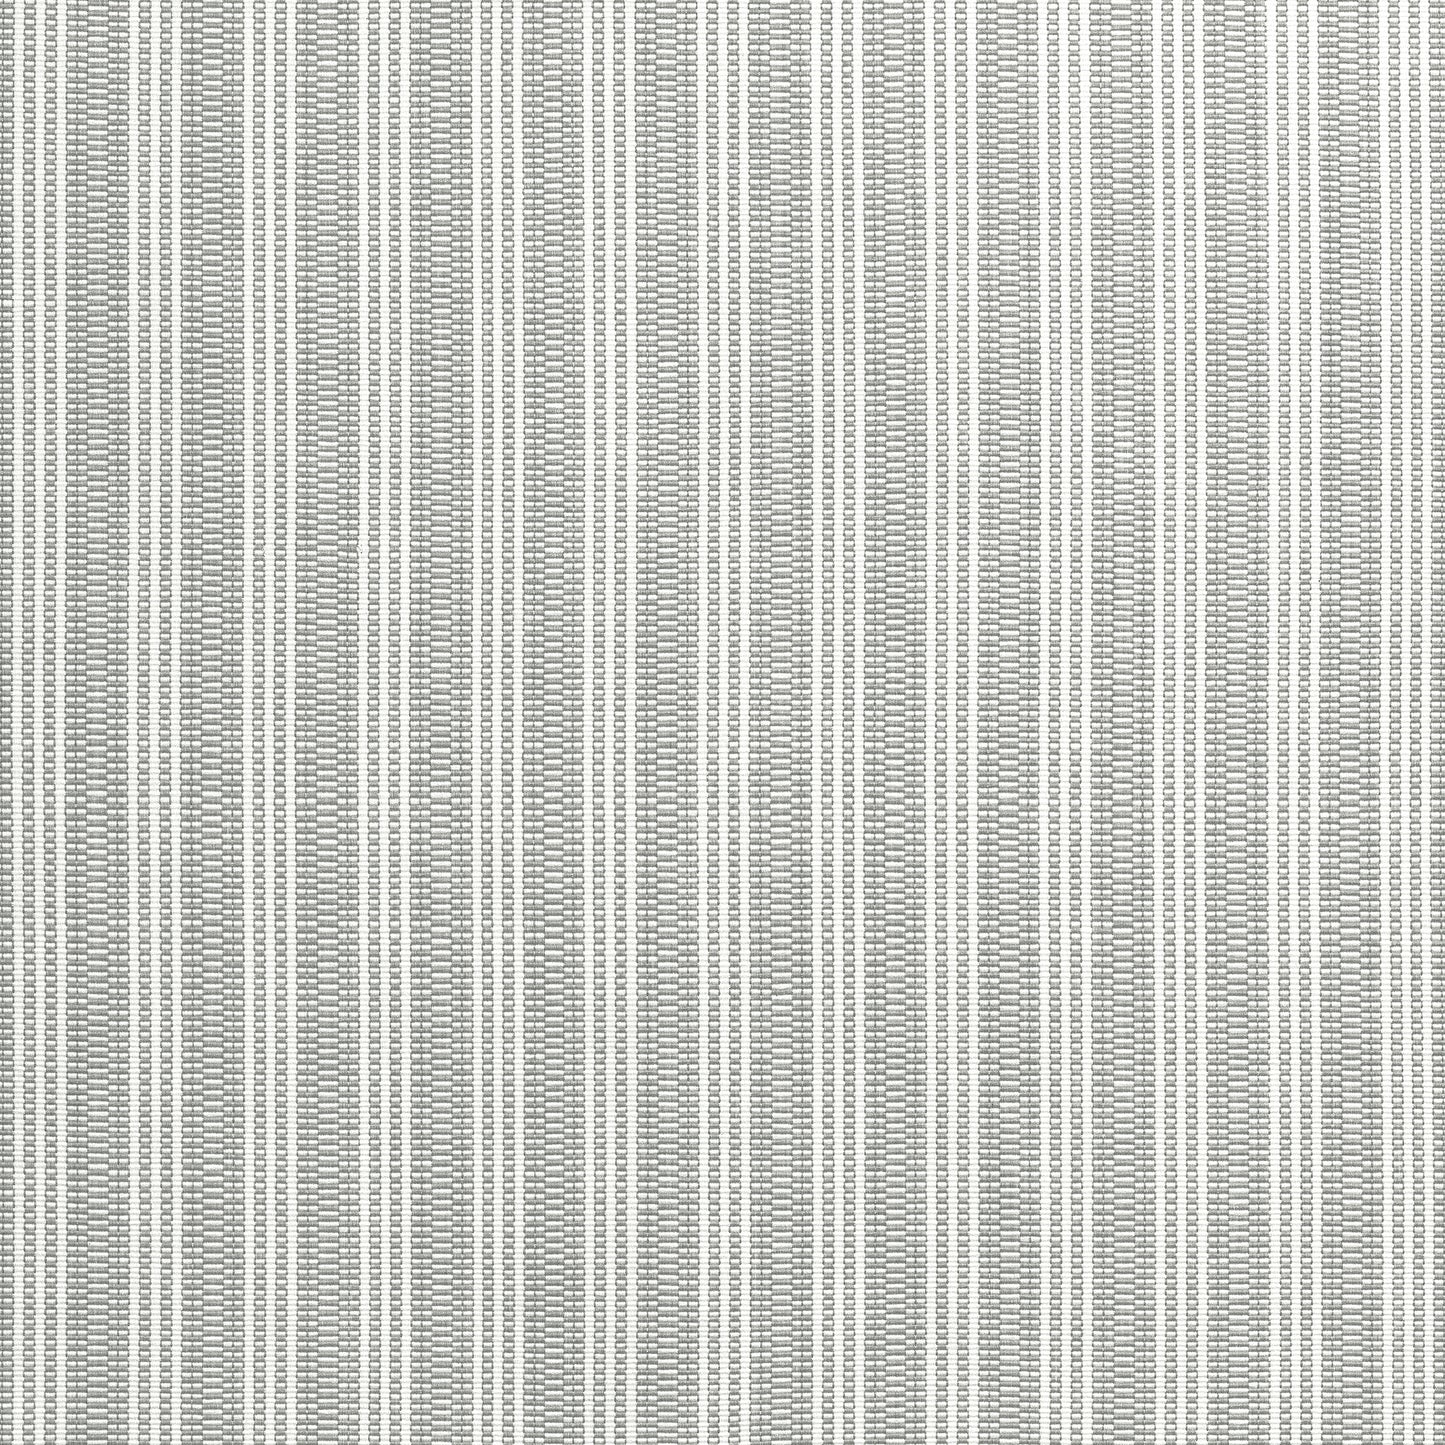 Purchase  Ann French Fabric Pattern number AW9846  pattern name  Reed Stripe